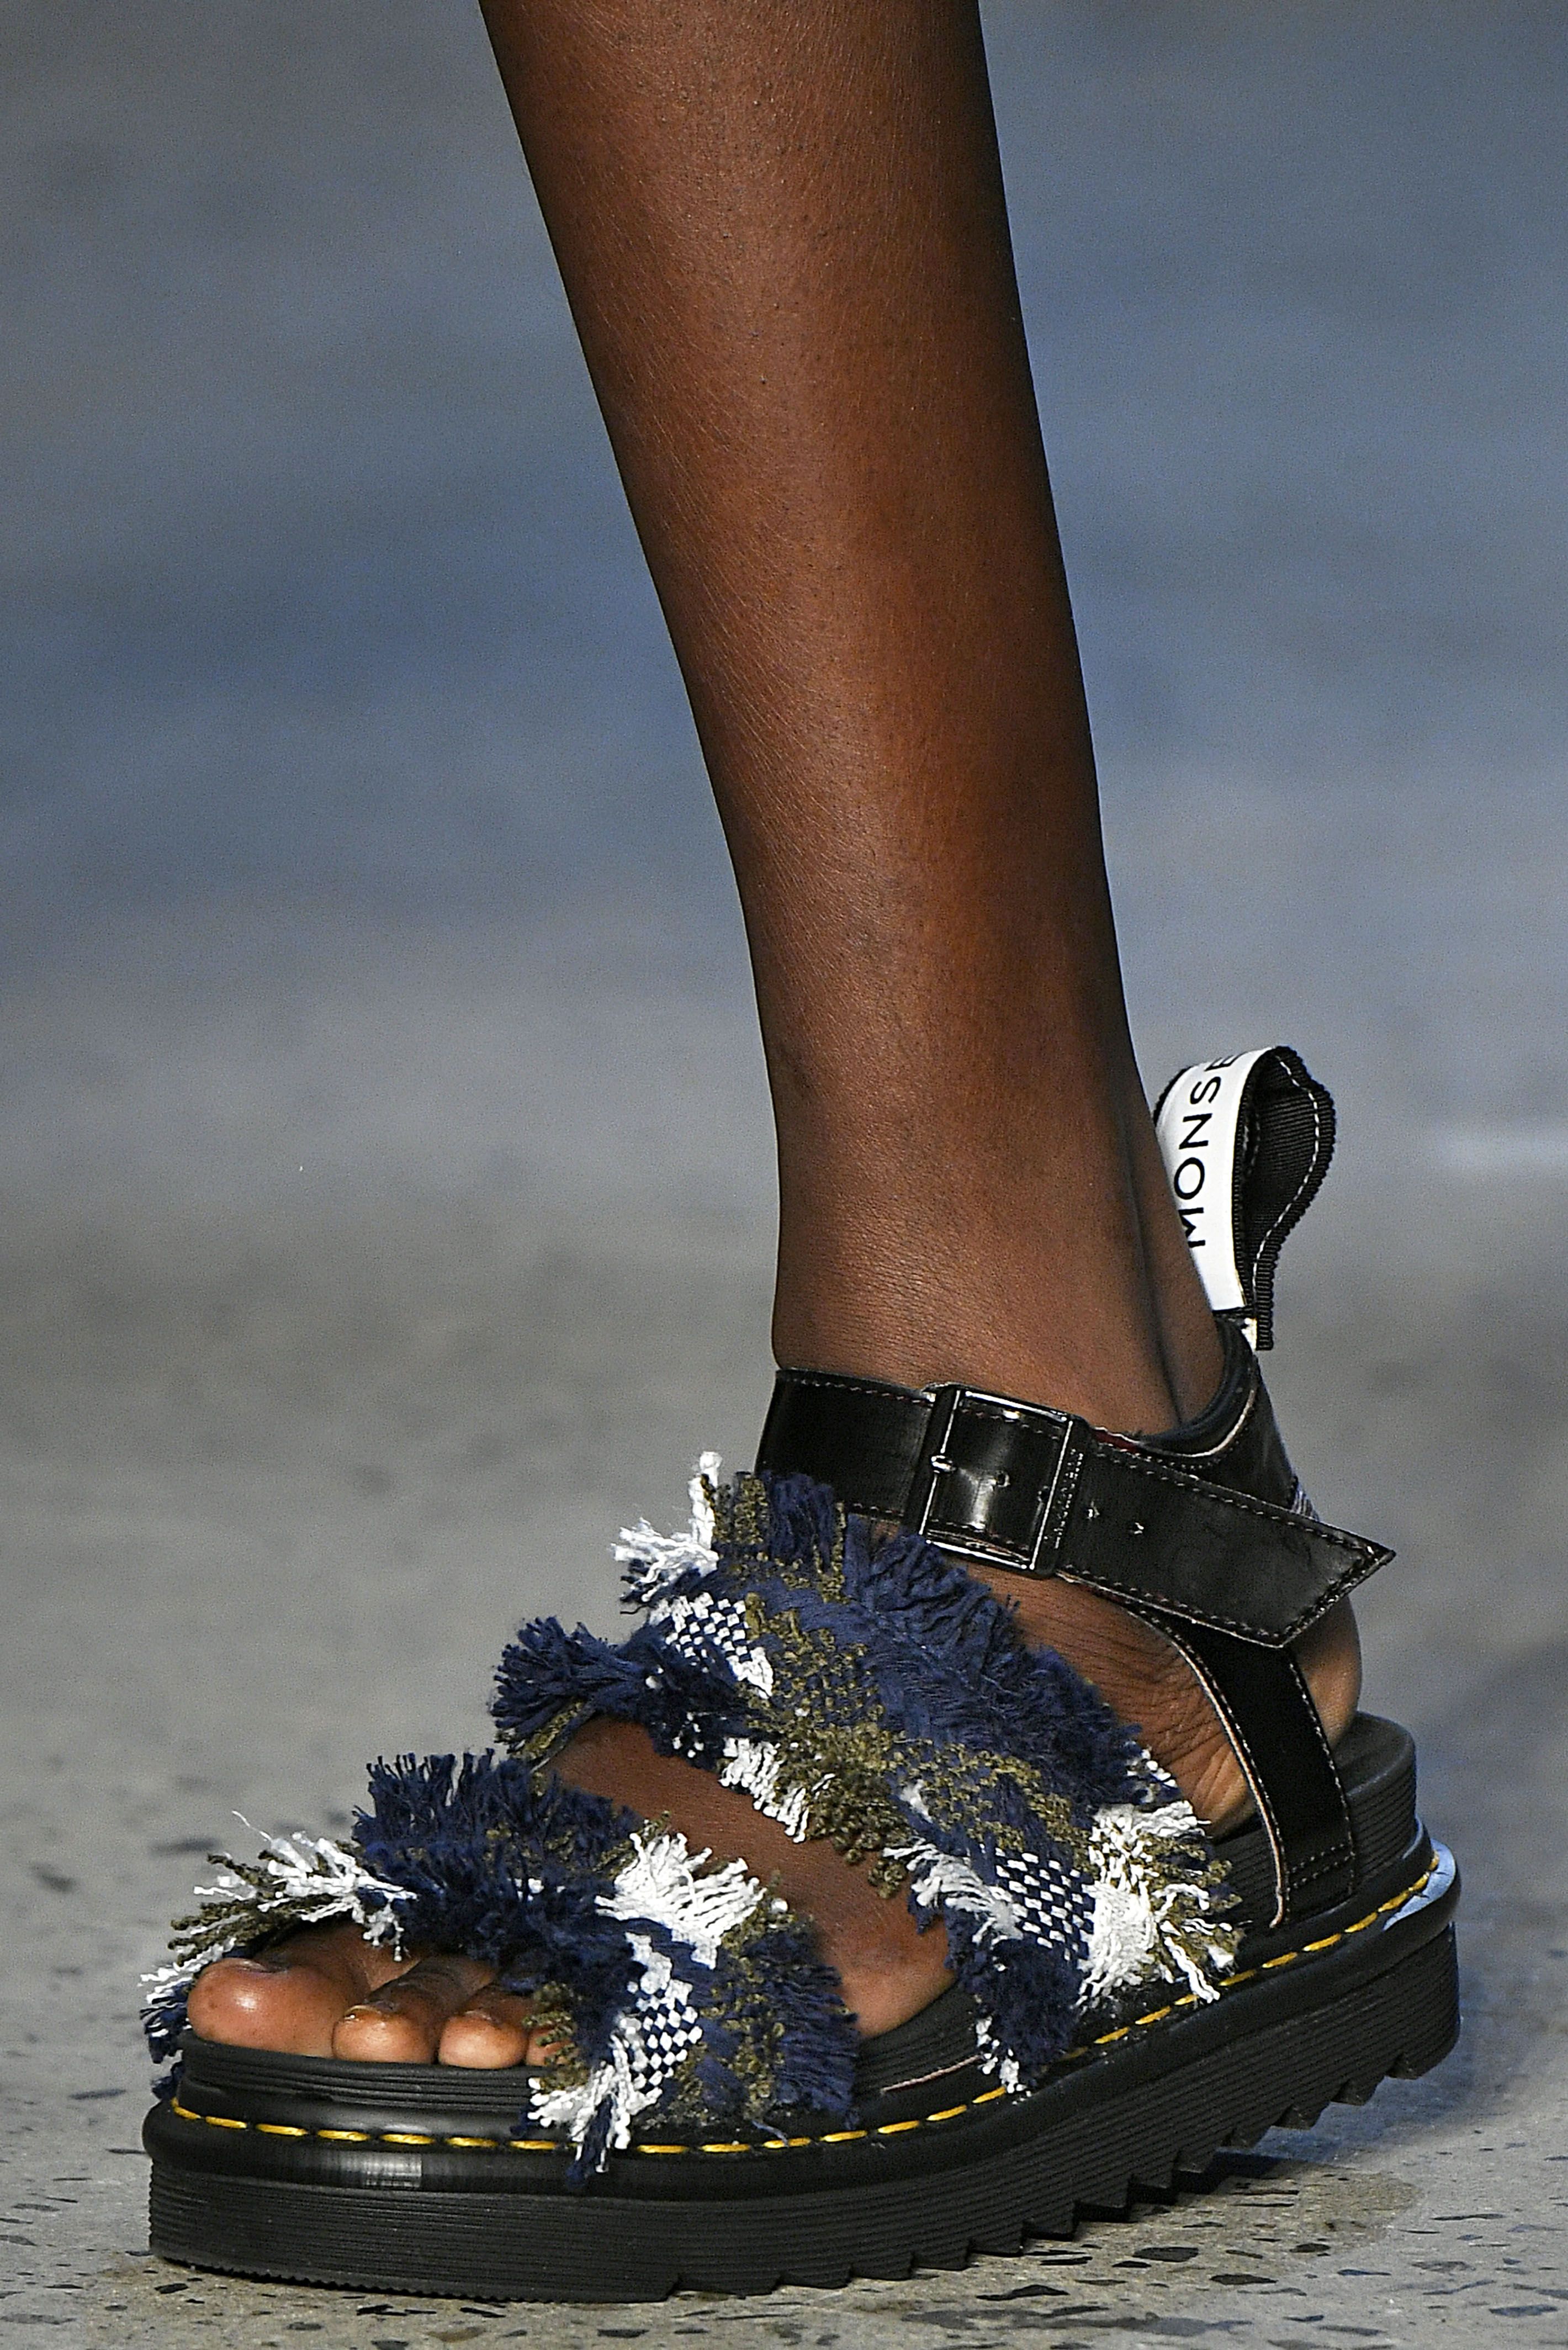 ss19 shoes trend